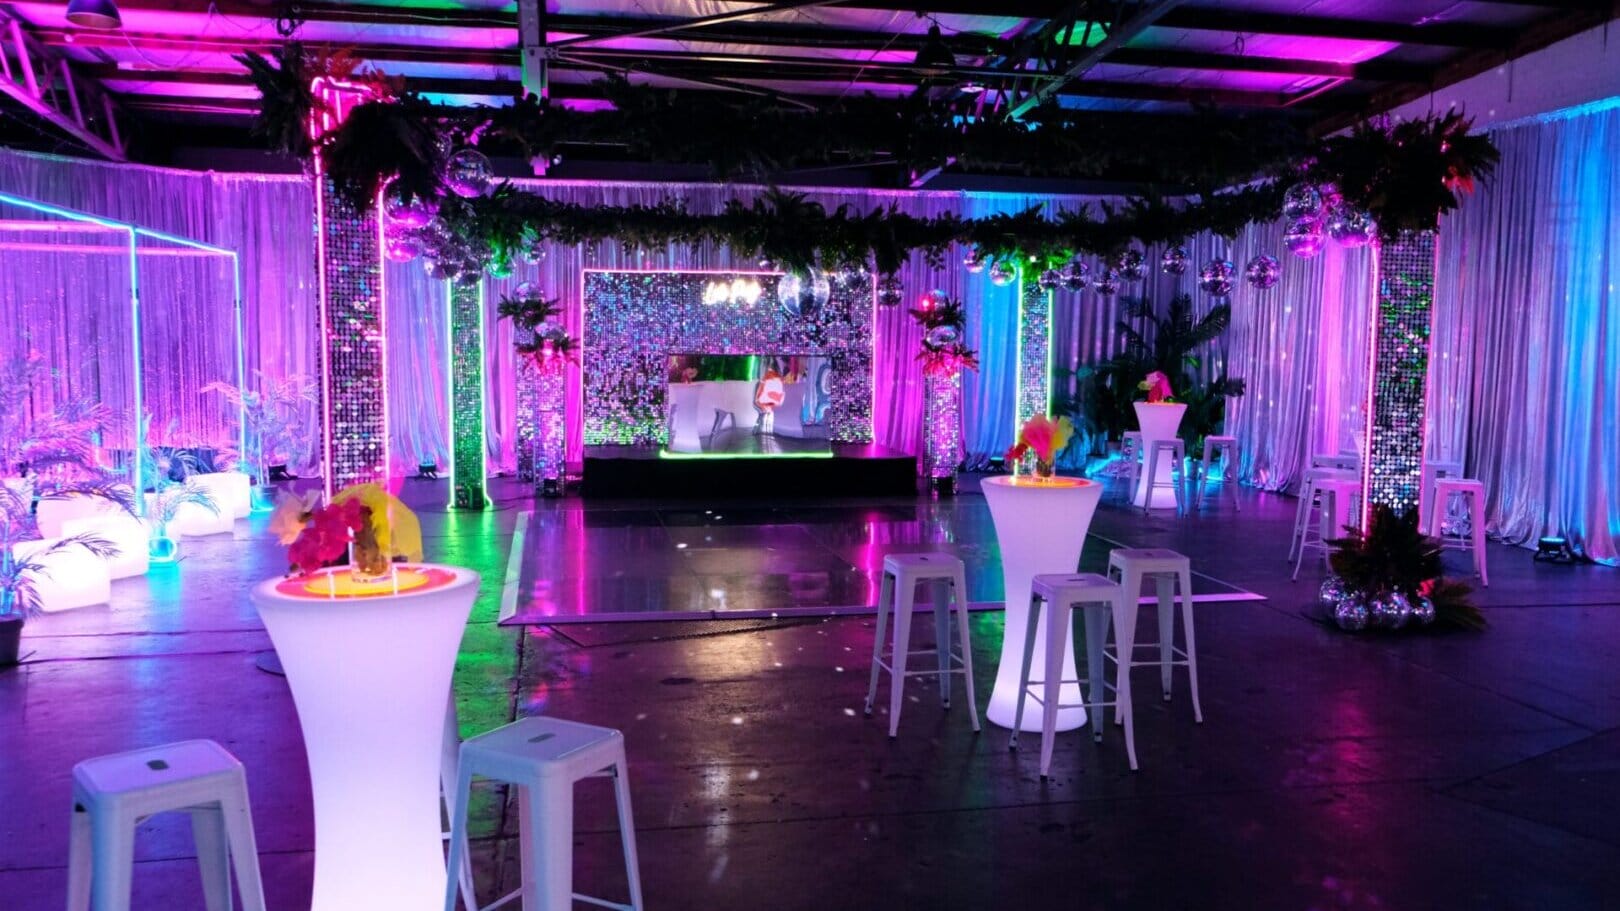 Room shot of neon disco party theme featuring illuminated furniture, bar stools, greenery, dance floor, neon lights, and sequin panels